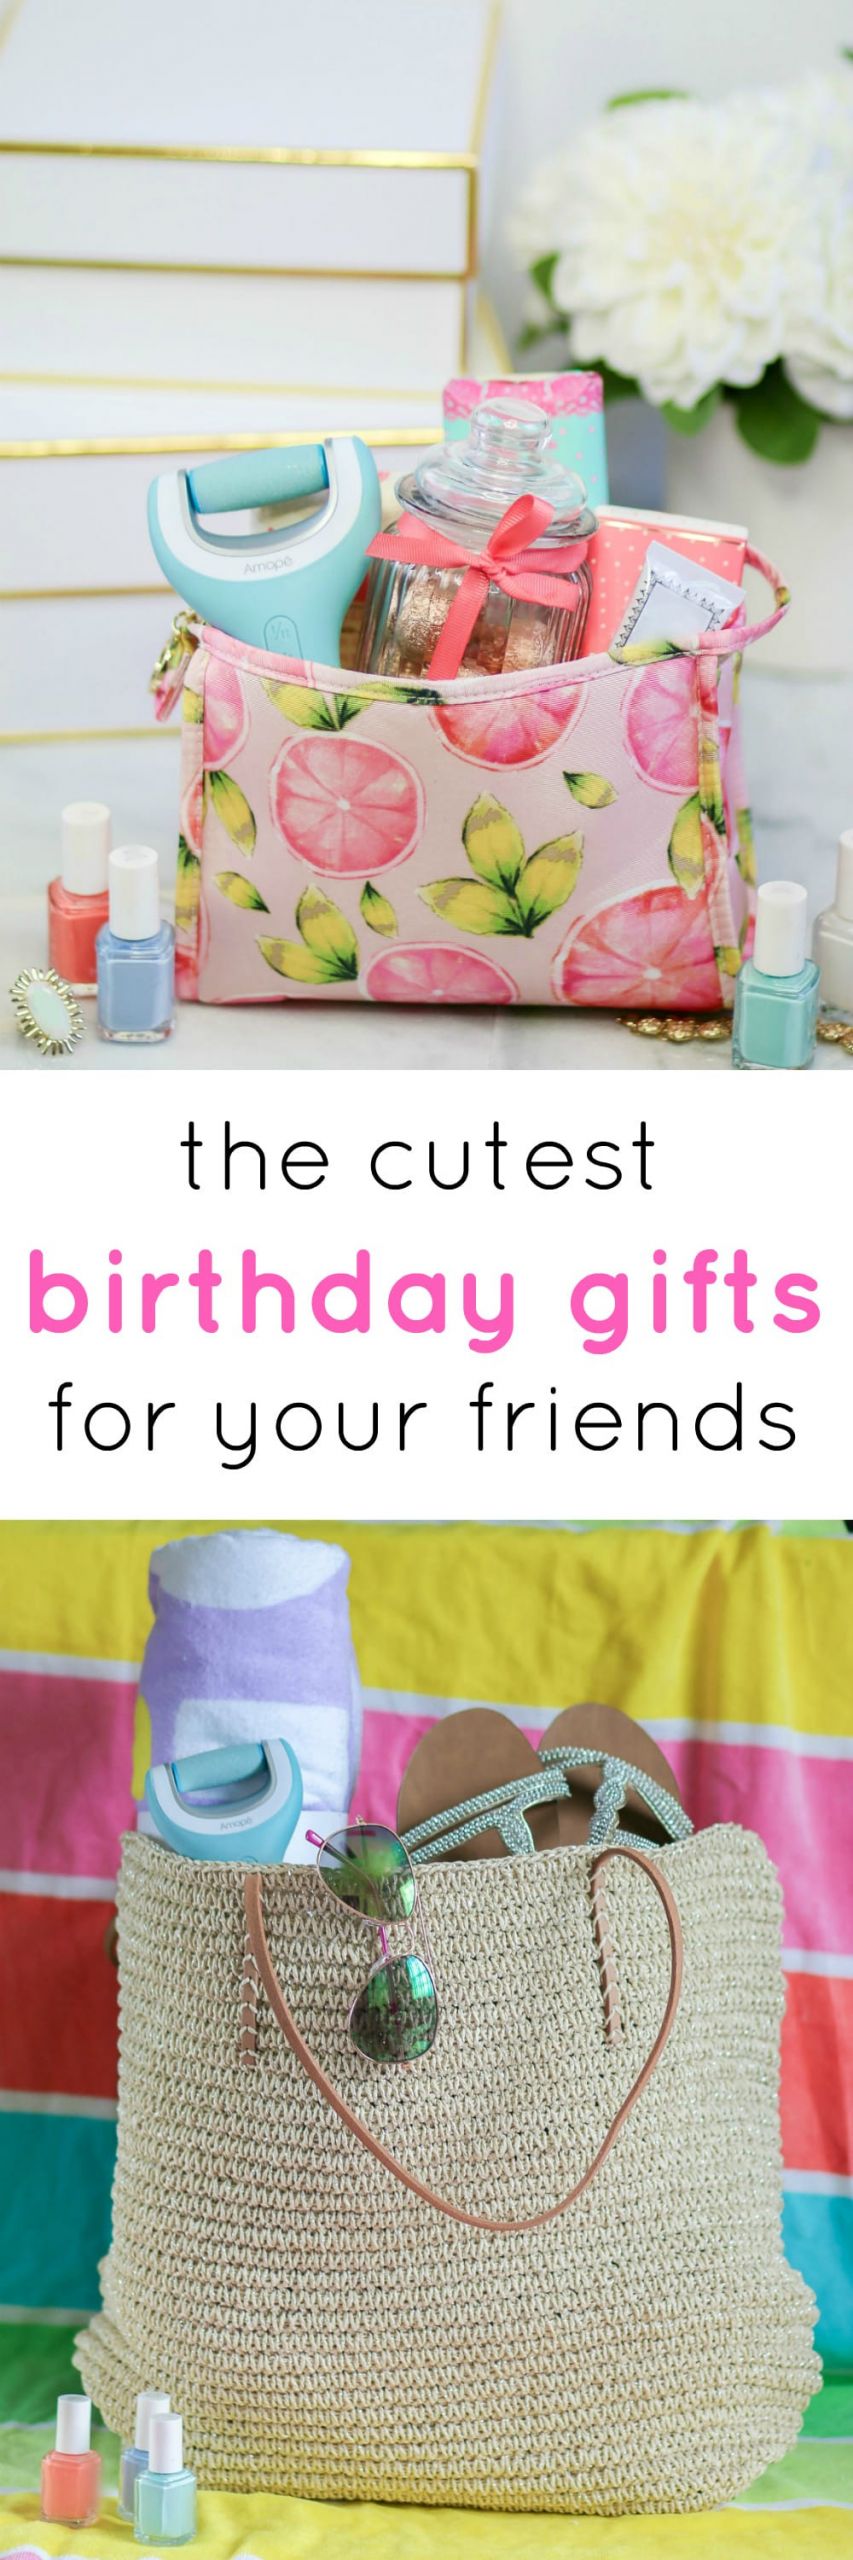 Cheap Birthday Gifts For Her
 Cute Gift Ideas for Your Friends